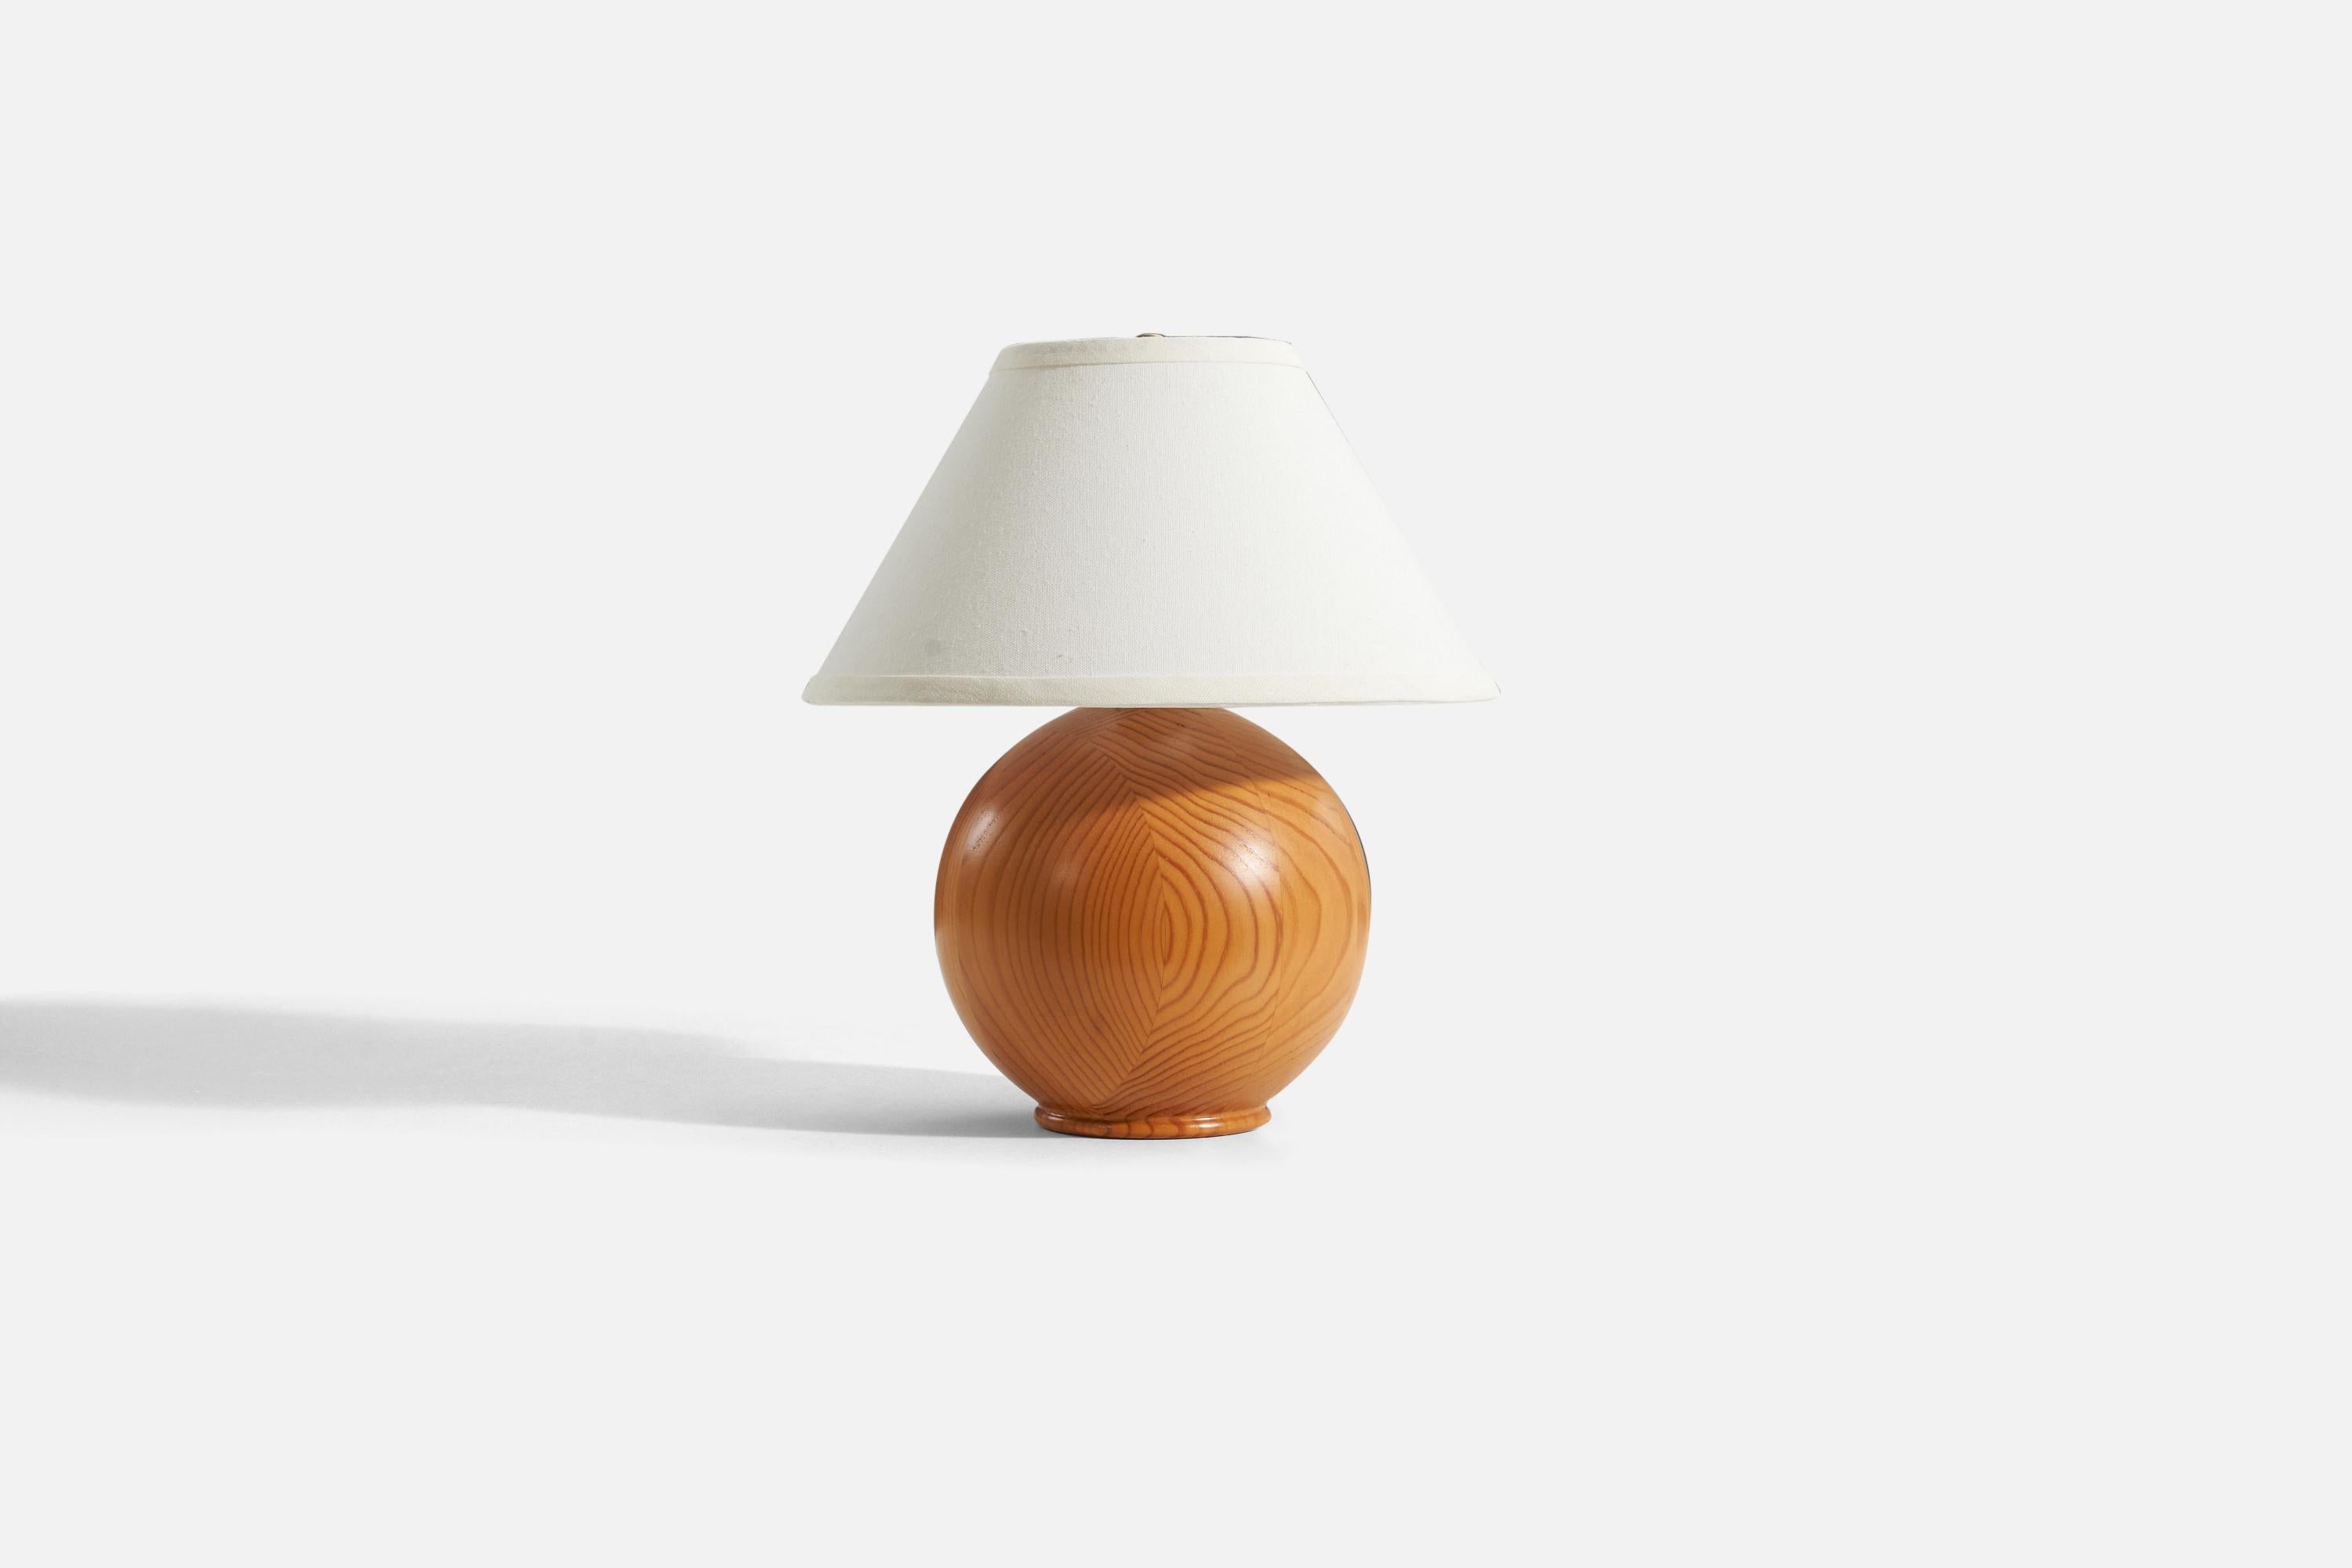 A pine table lamp designed and produced by a Swedish designer, Sweden, 1960s.

Sold without lampshade. 
Dimensions of lamp (inches) : 10.625 x 7.125 x 7.125 (H x W x D).
Dimensions shade (inches) : 5.25 x 12.25 x 7.25 (T x B x H).
Dimension of